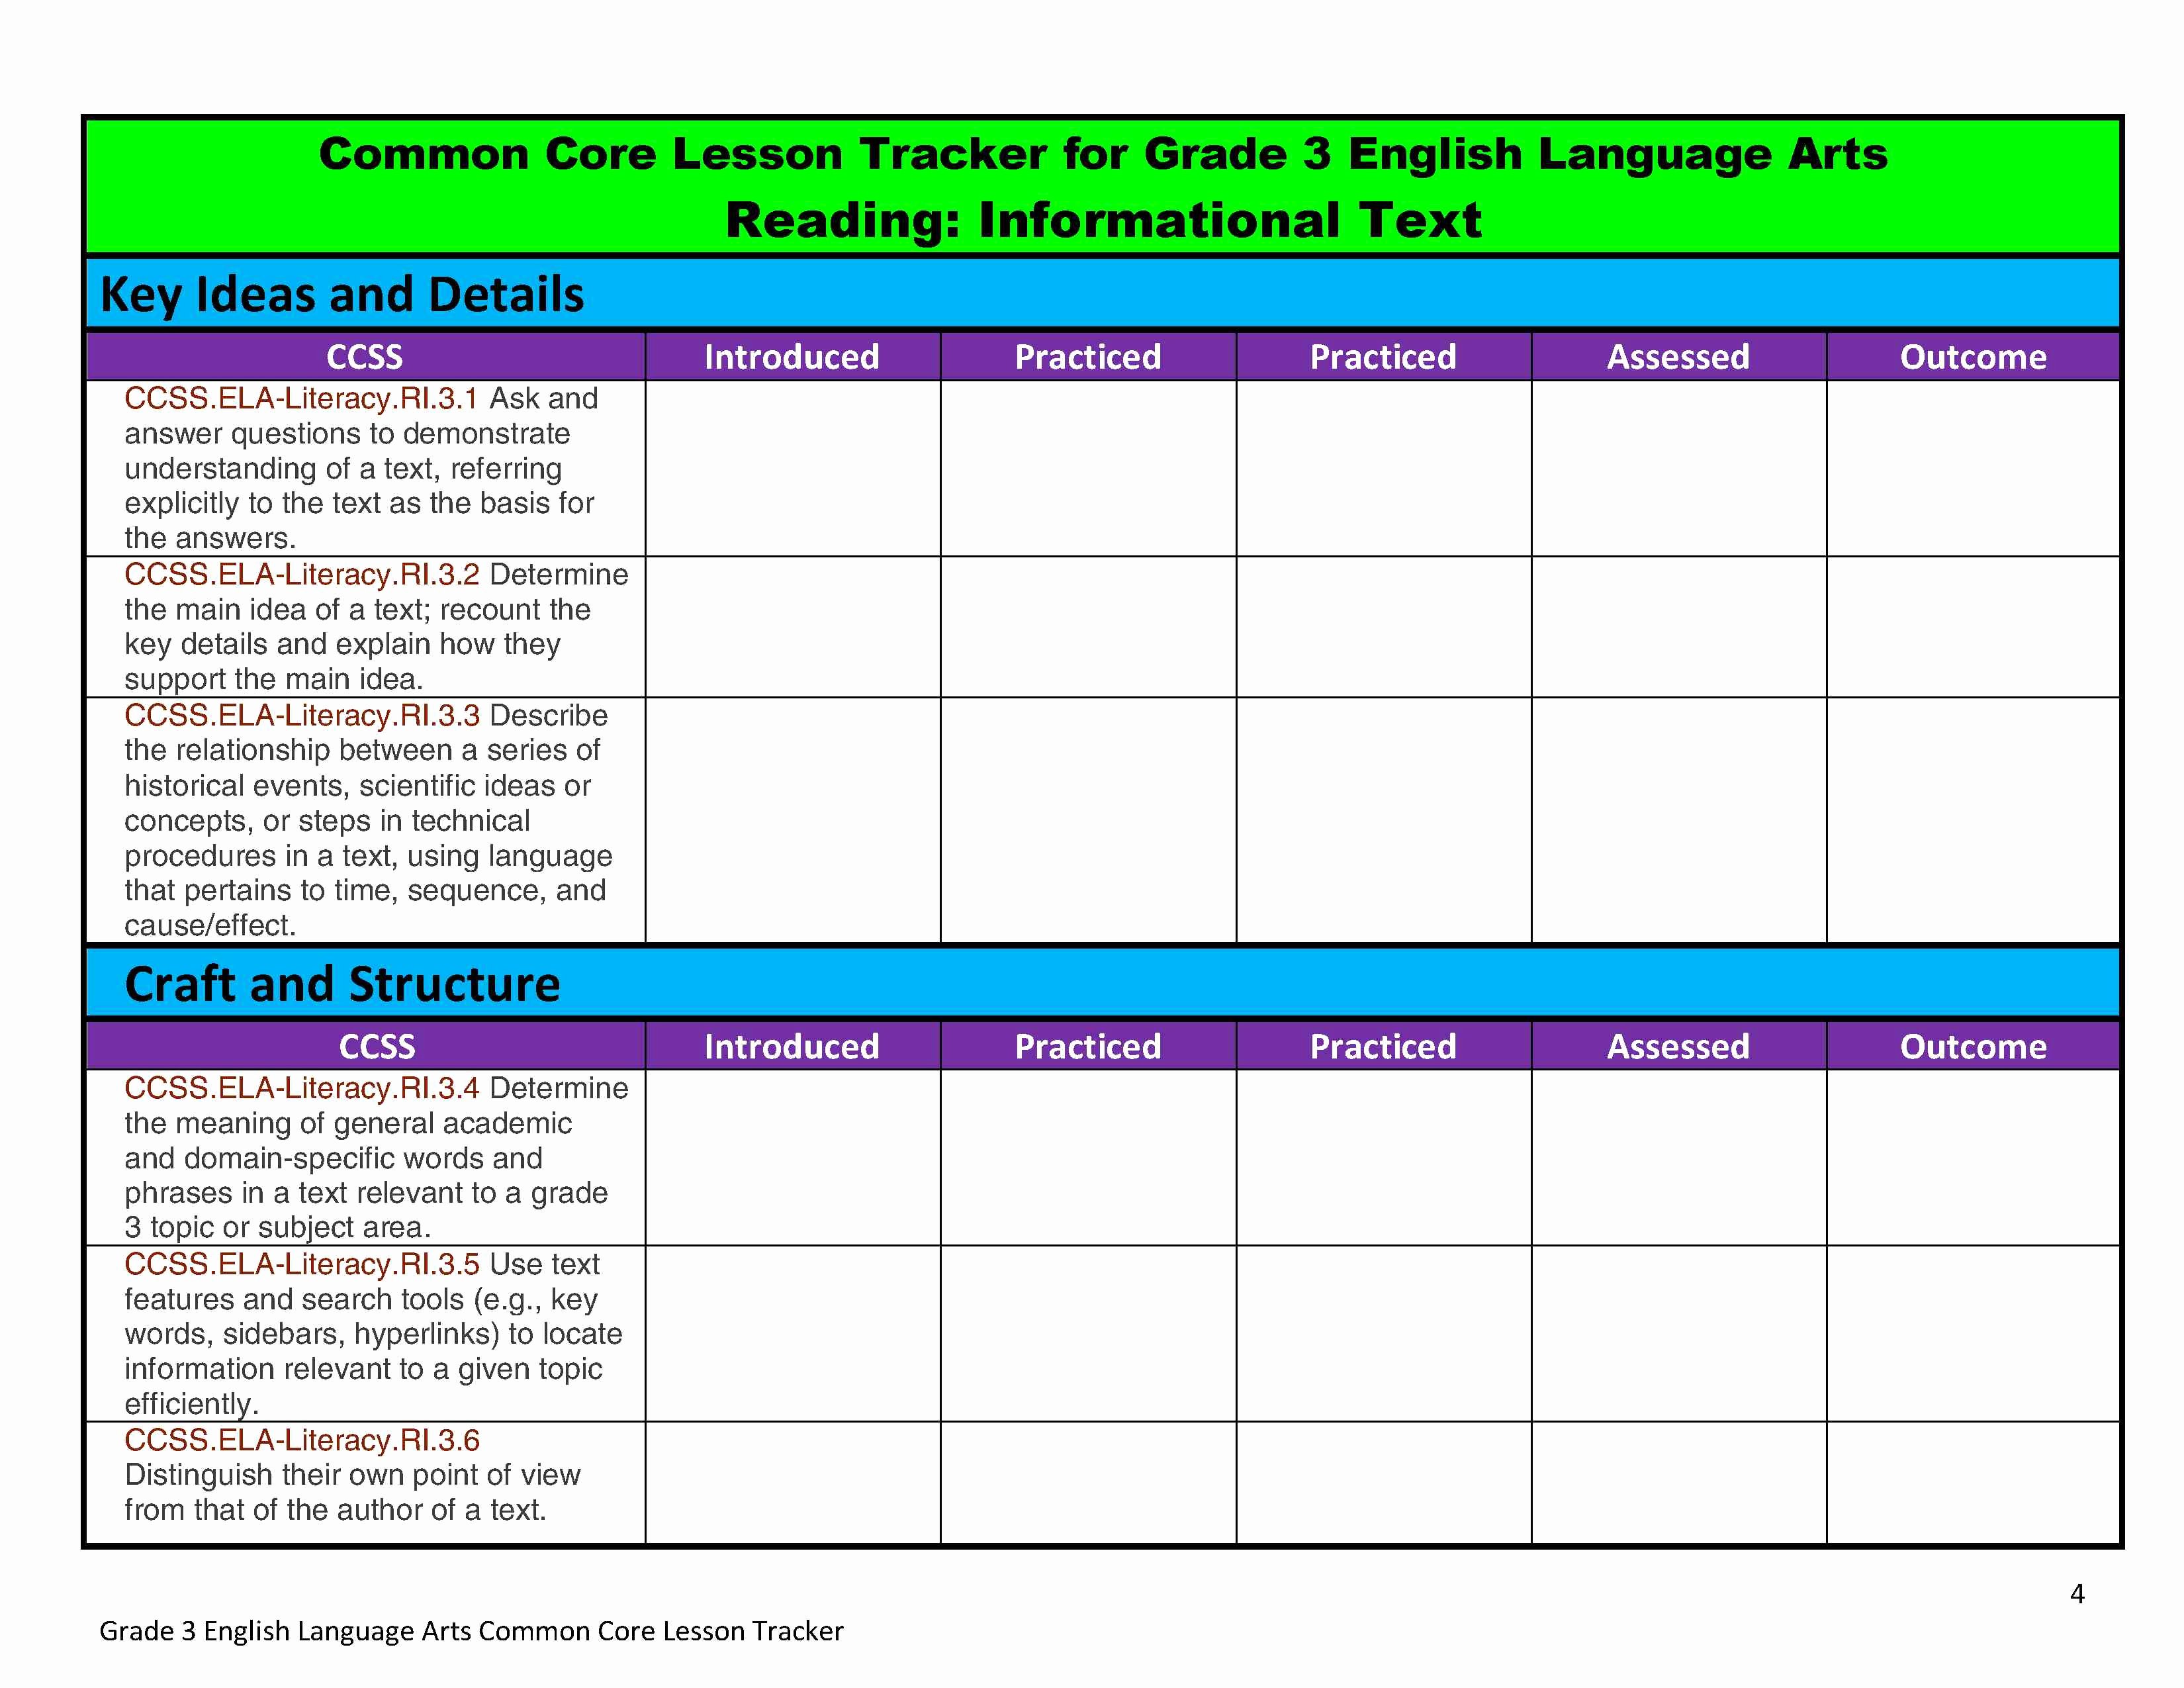 Mon Core Lesson Plan organizers for Math and Ela